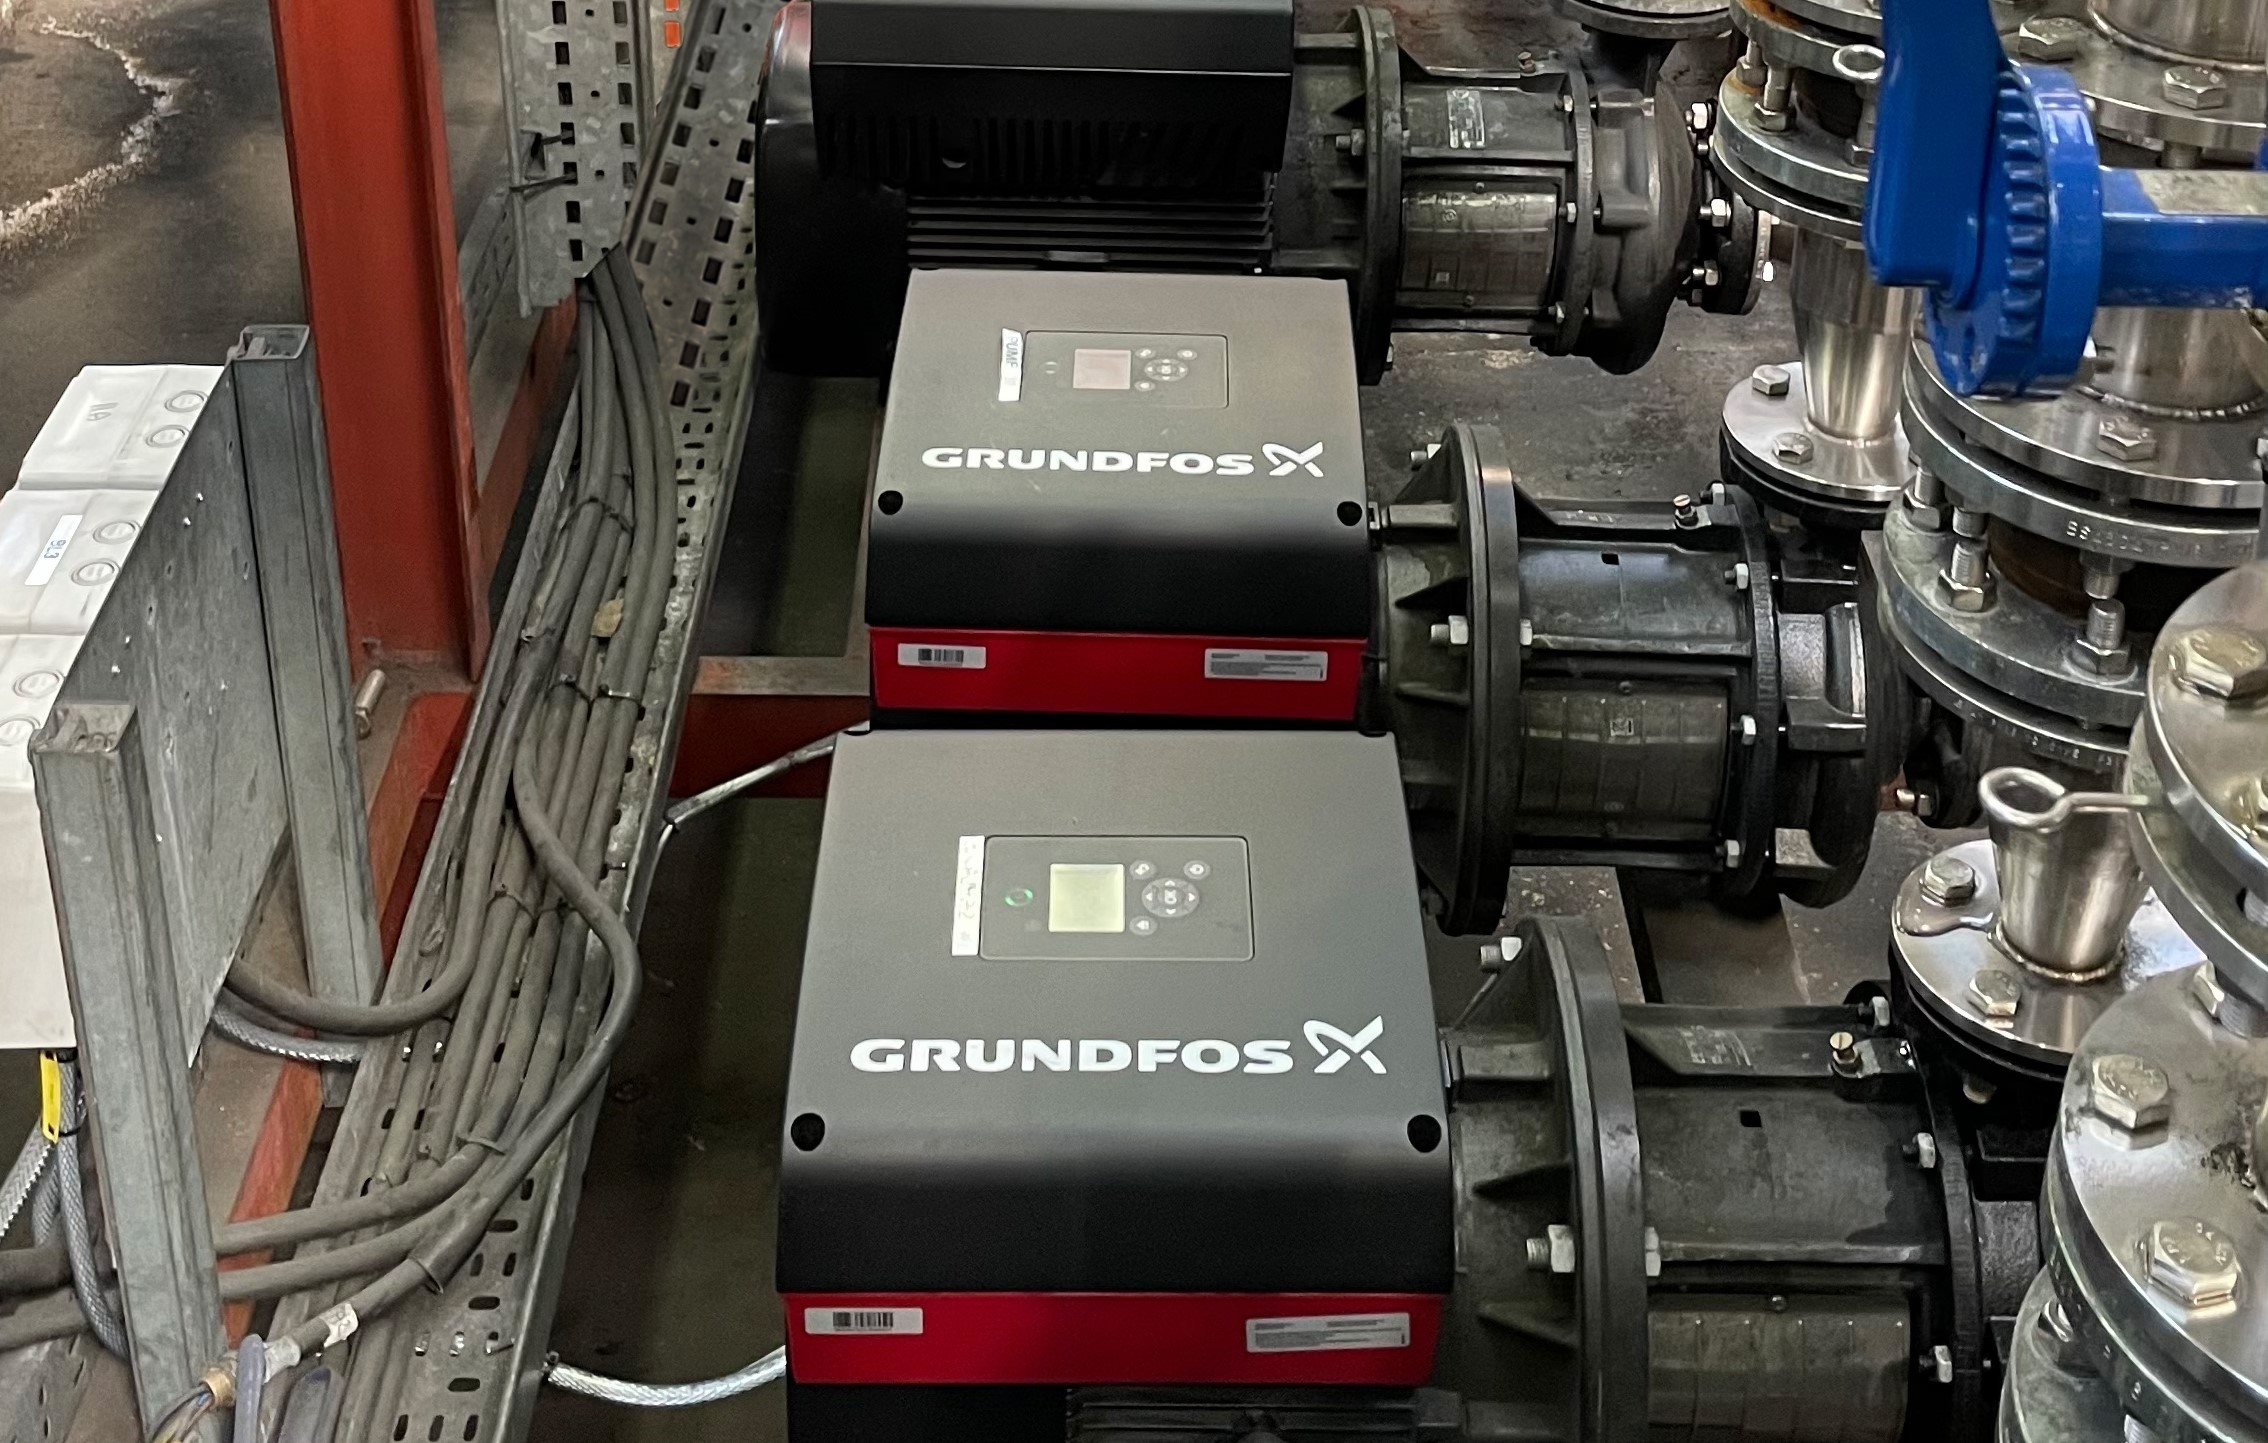 Grundfos retrofit water pumps within a Suntory Beverage & Food factory.